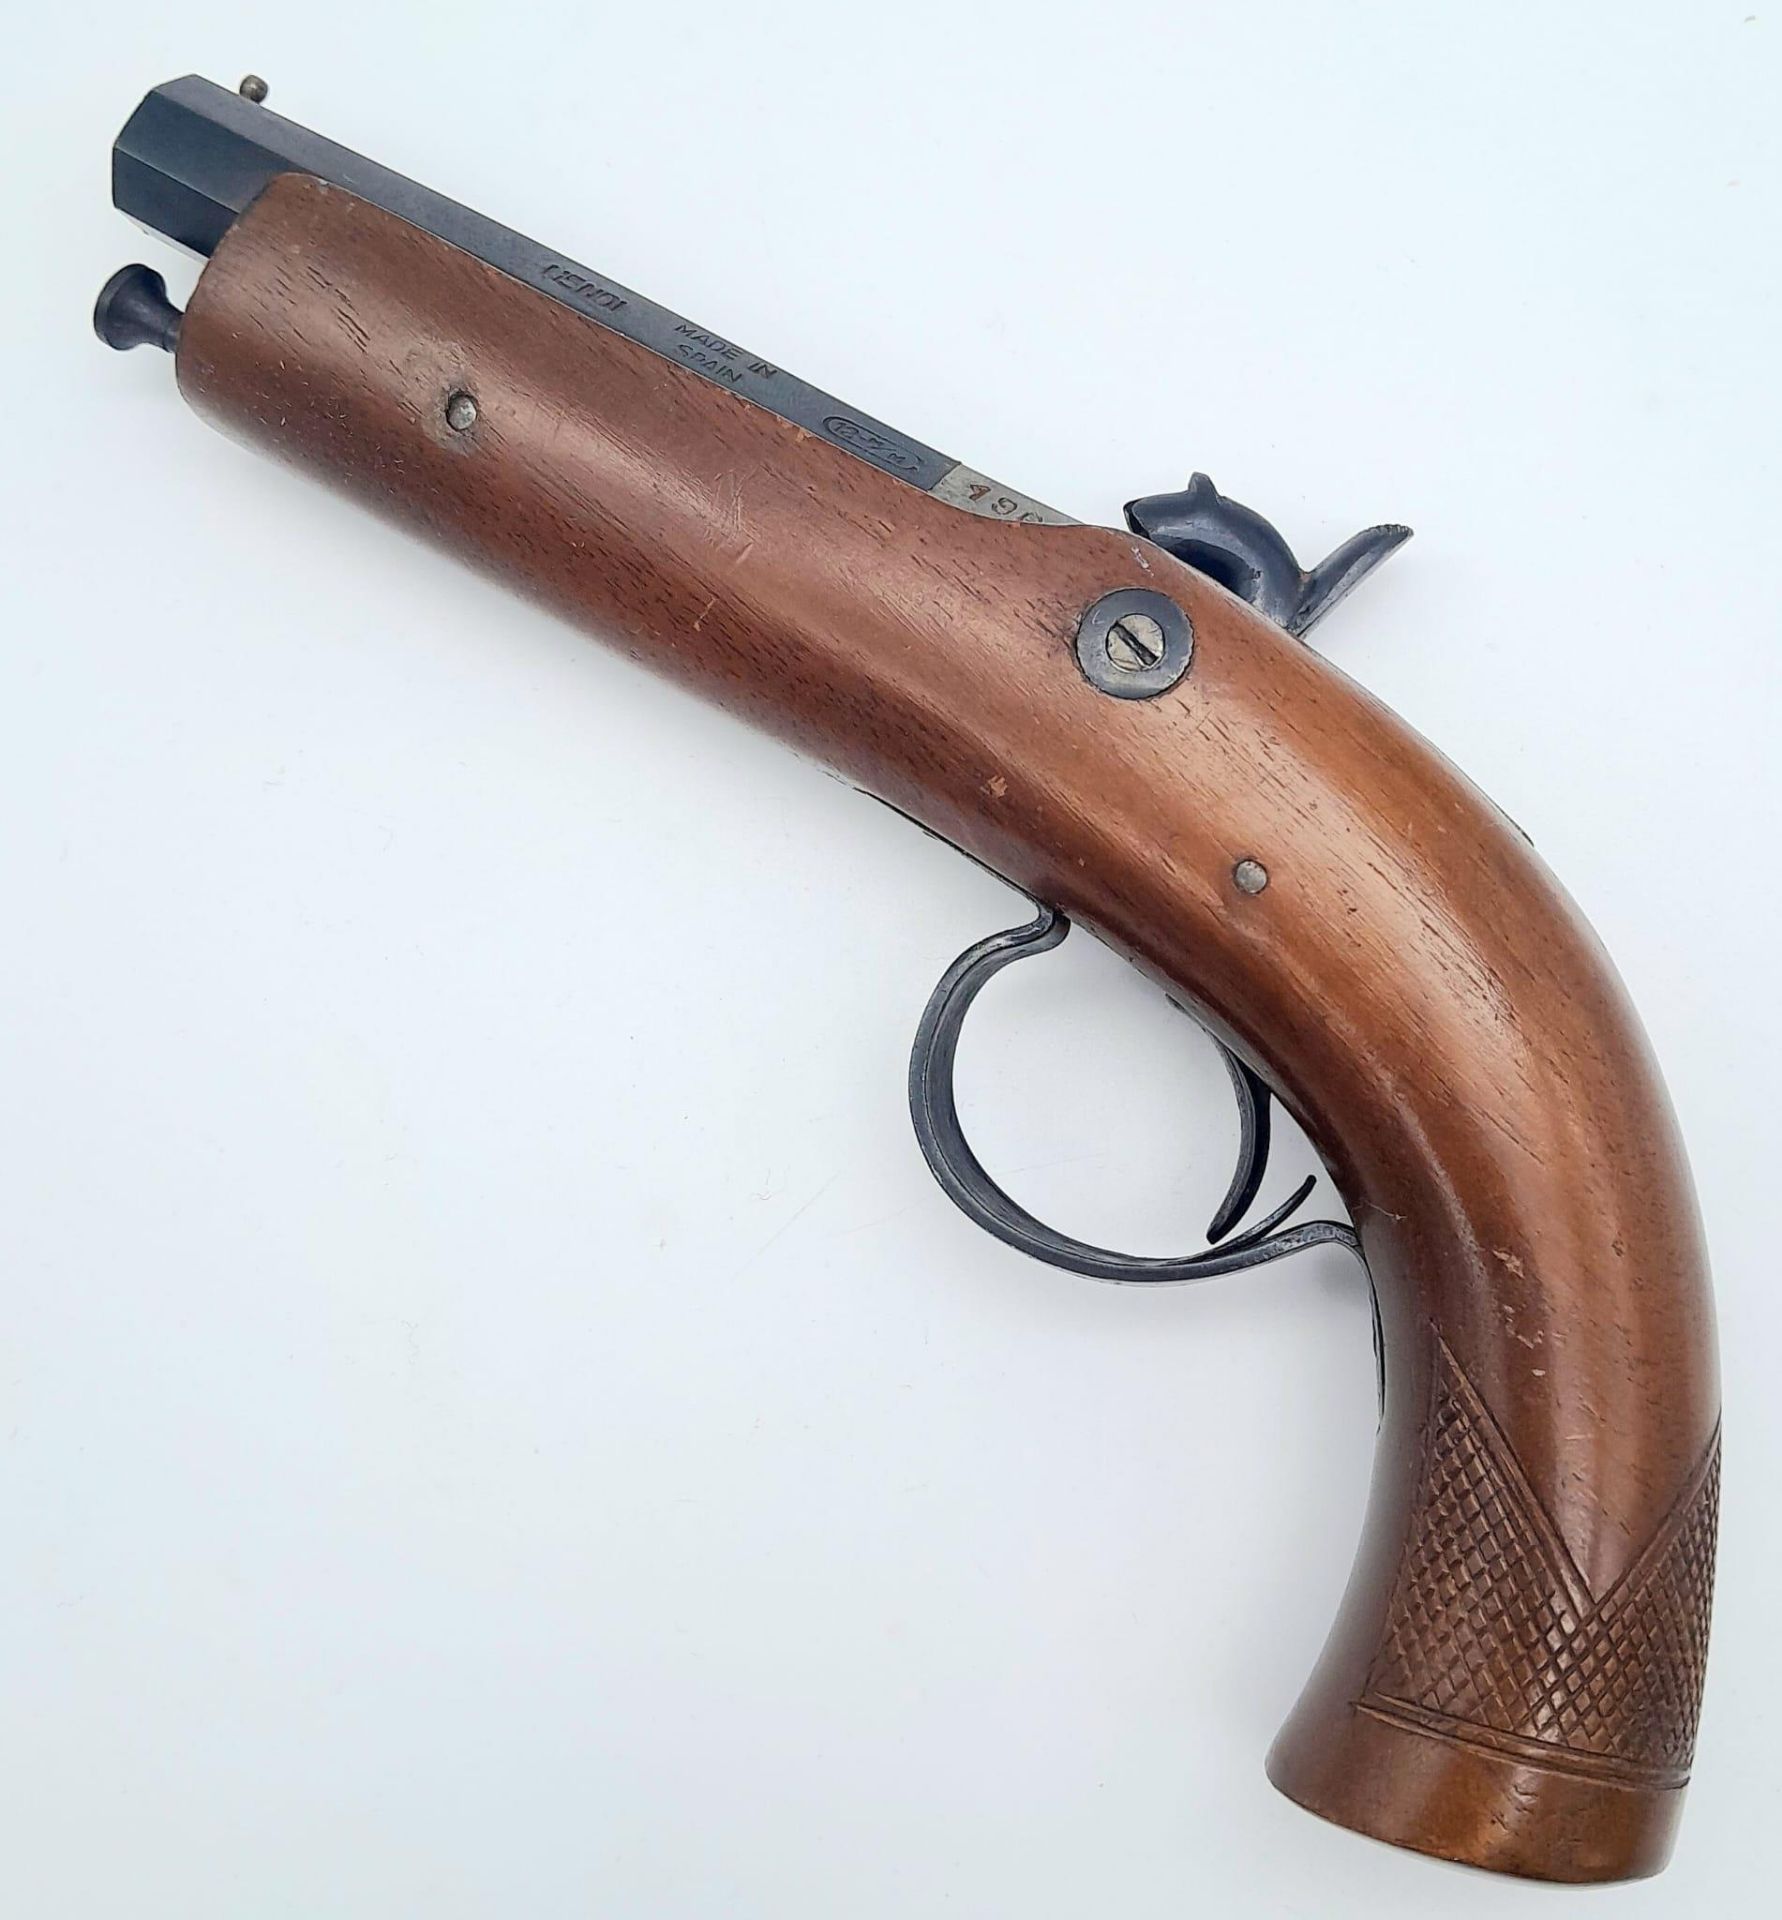 A Deactivated Reproduction Spanish Small Black Powder Muzzle Loading Pistol. Perfect for movie/tv - Image 2 of 7